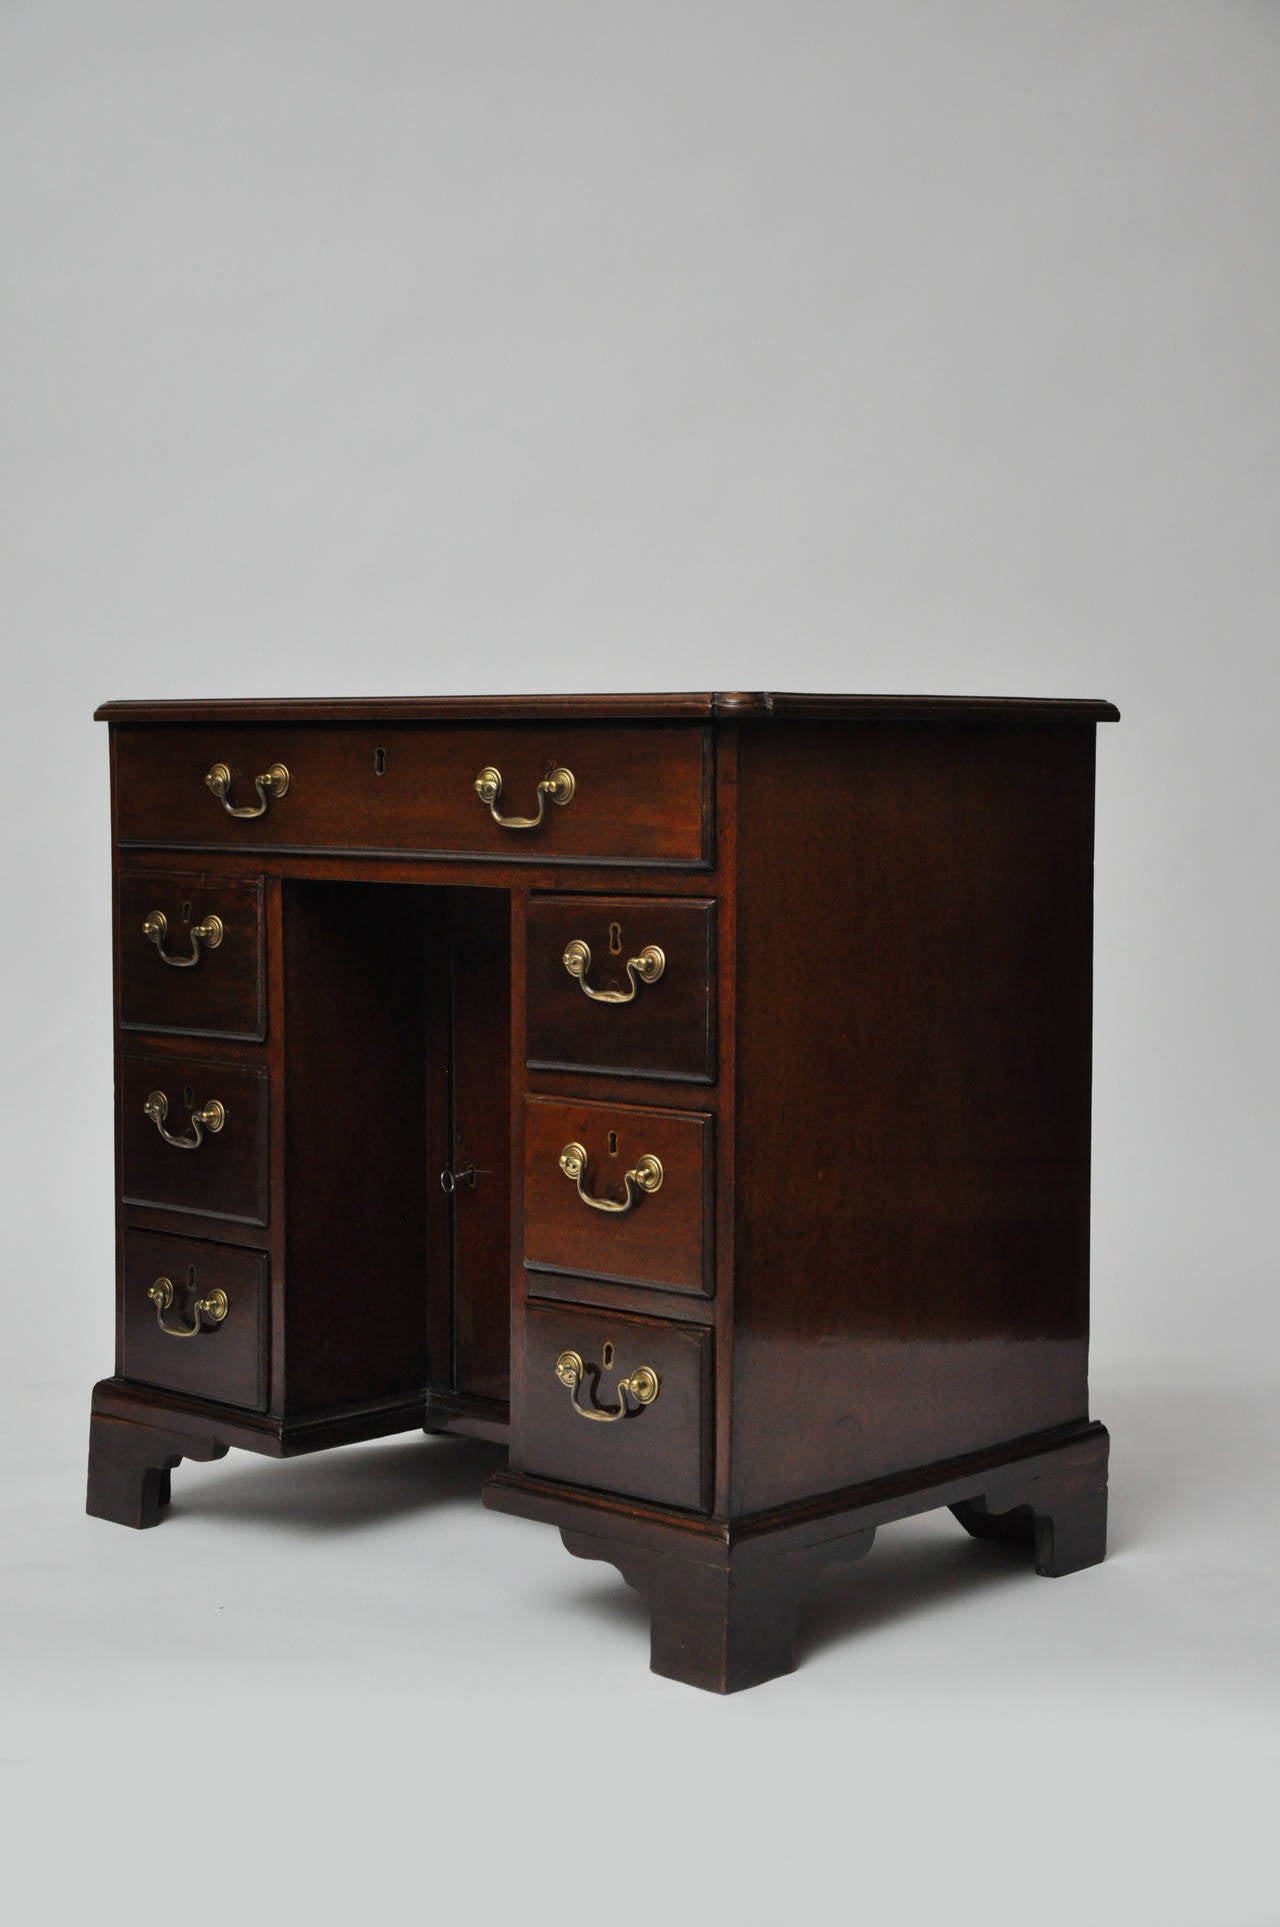 George III Mahogany Kneehole Desk, late 18th Century with seven drawers.